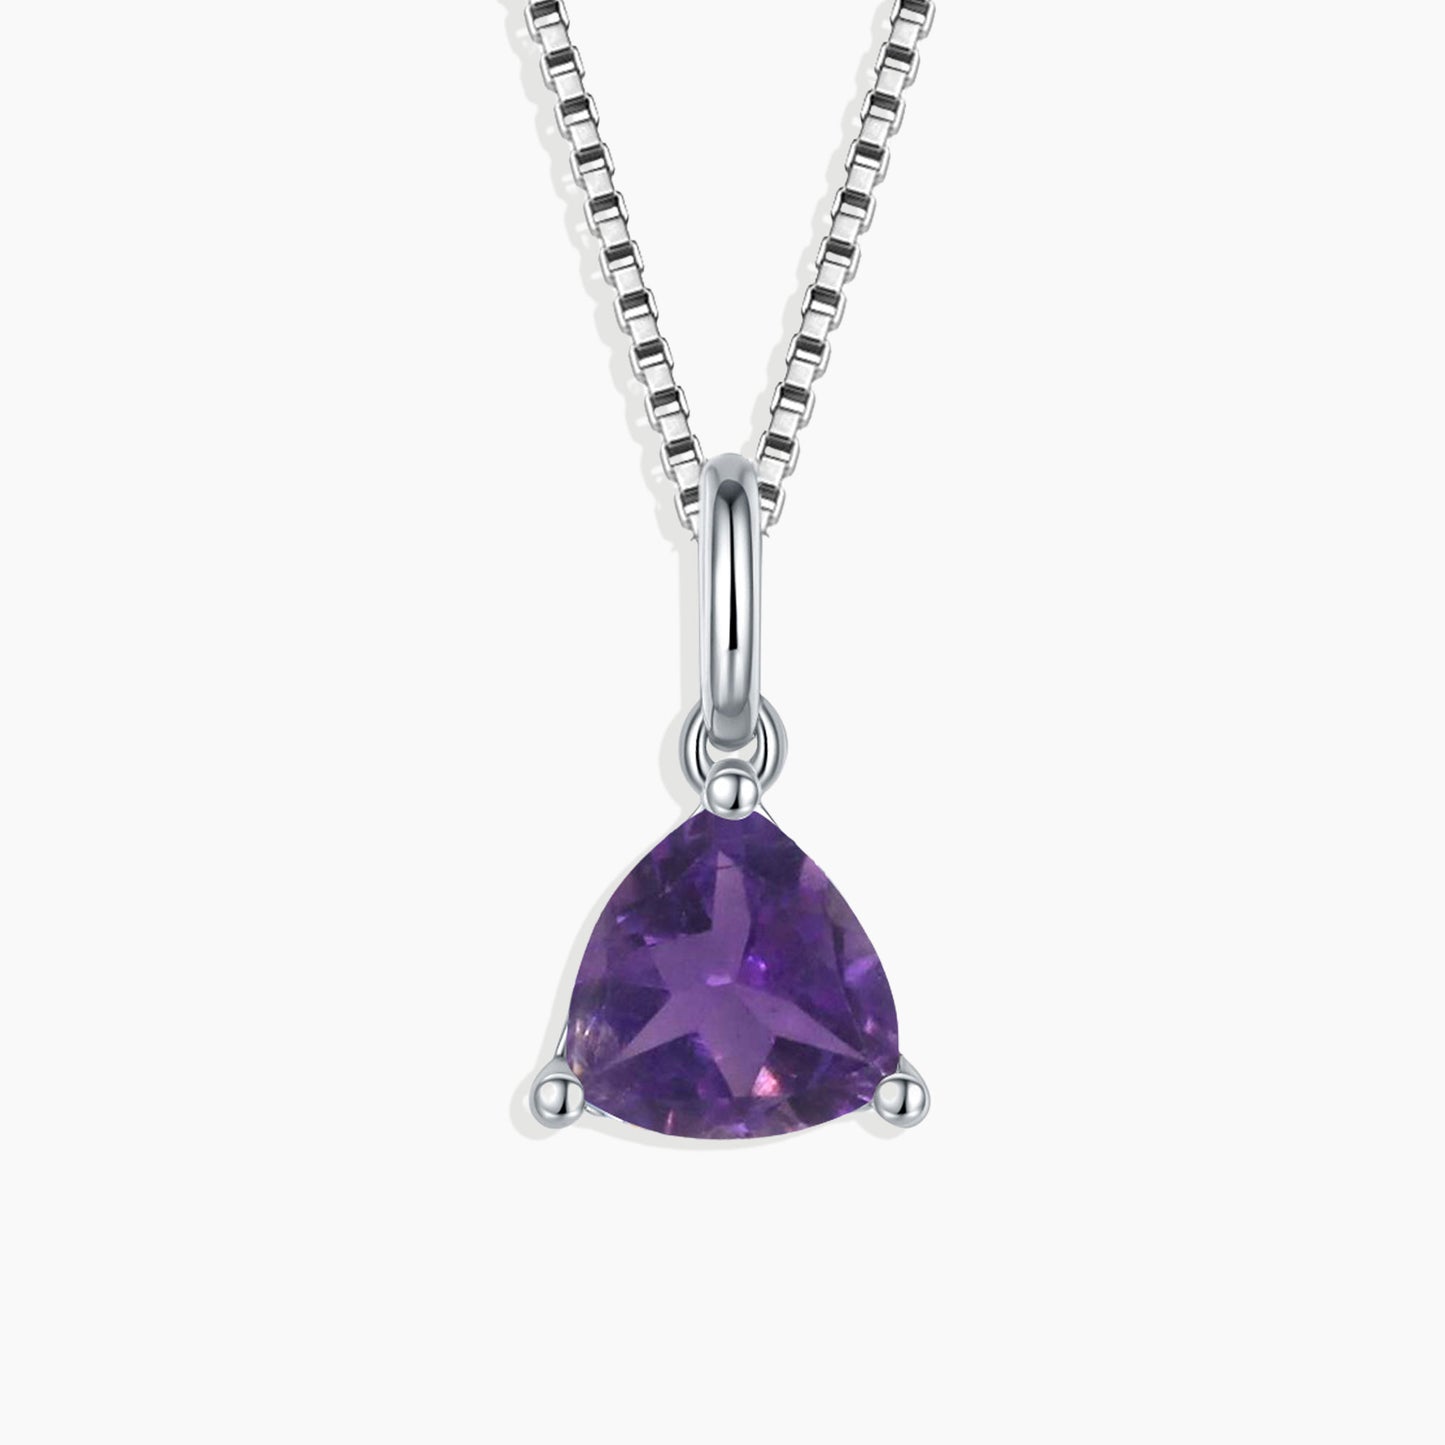 Irosk Tri Necklace in Sterling Silver -  Amethyst